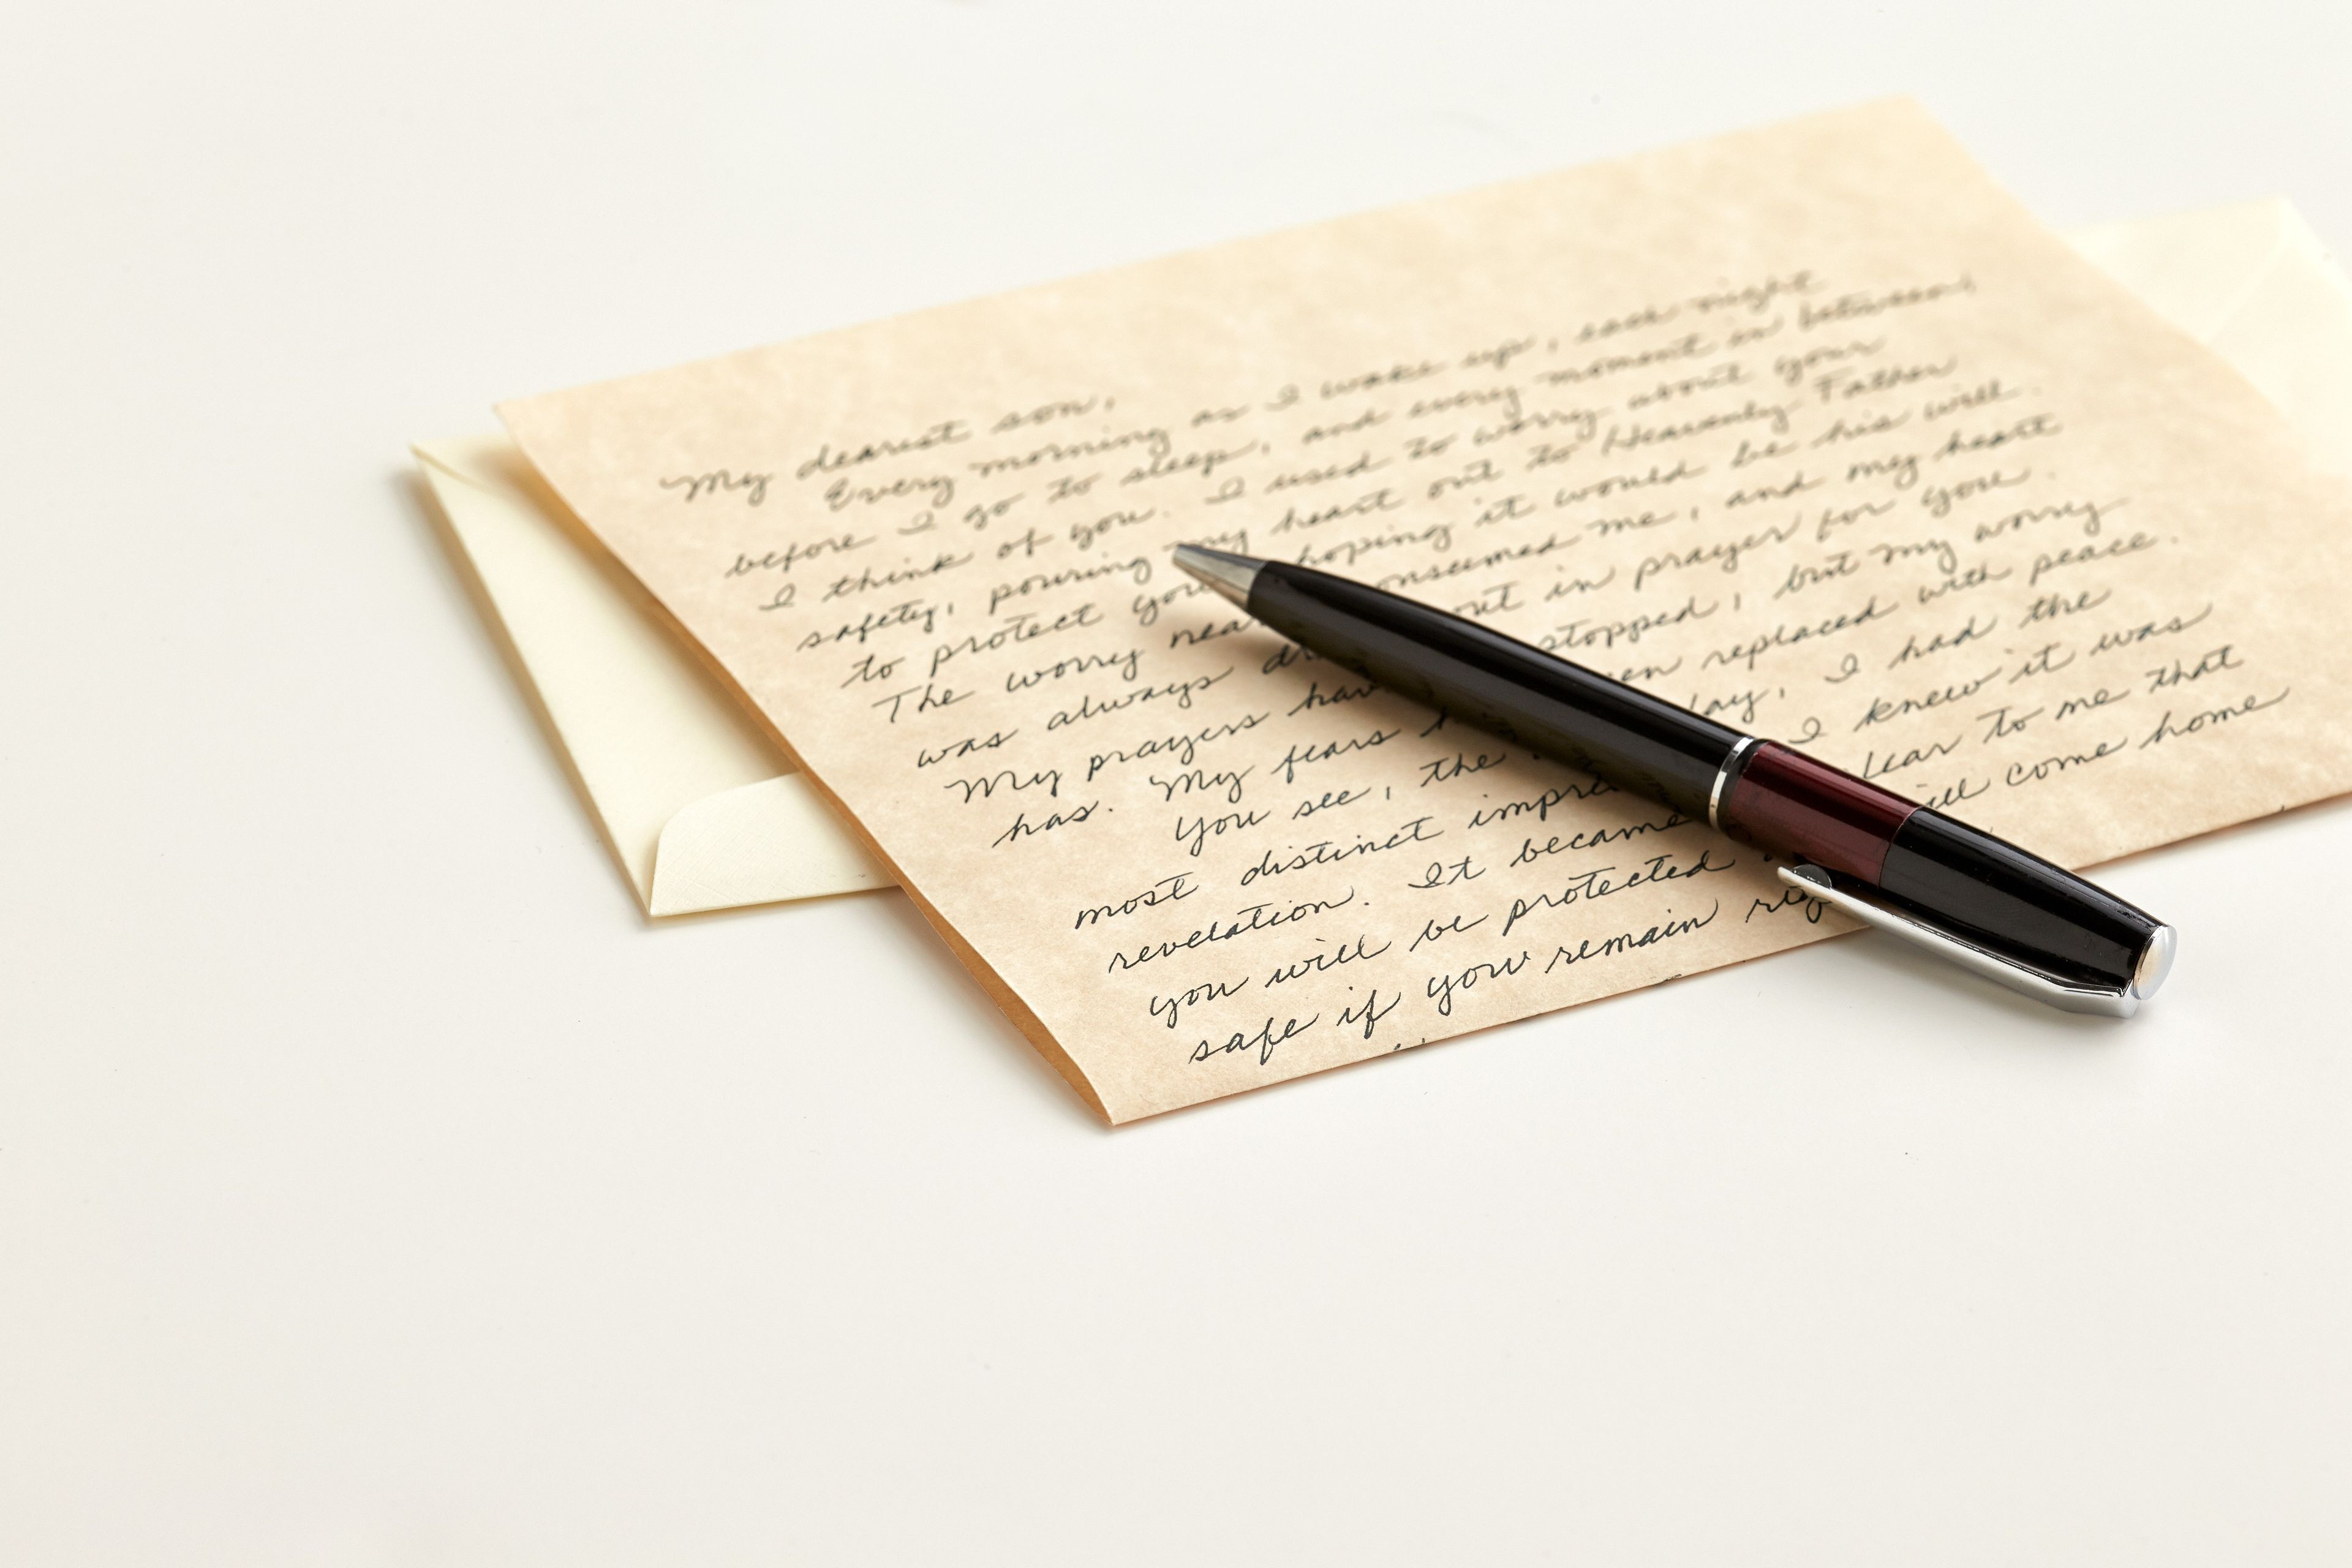 A handwritten letter lying on a white surface with an envelope and a pen.